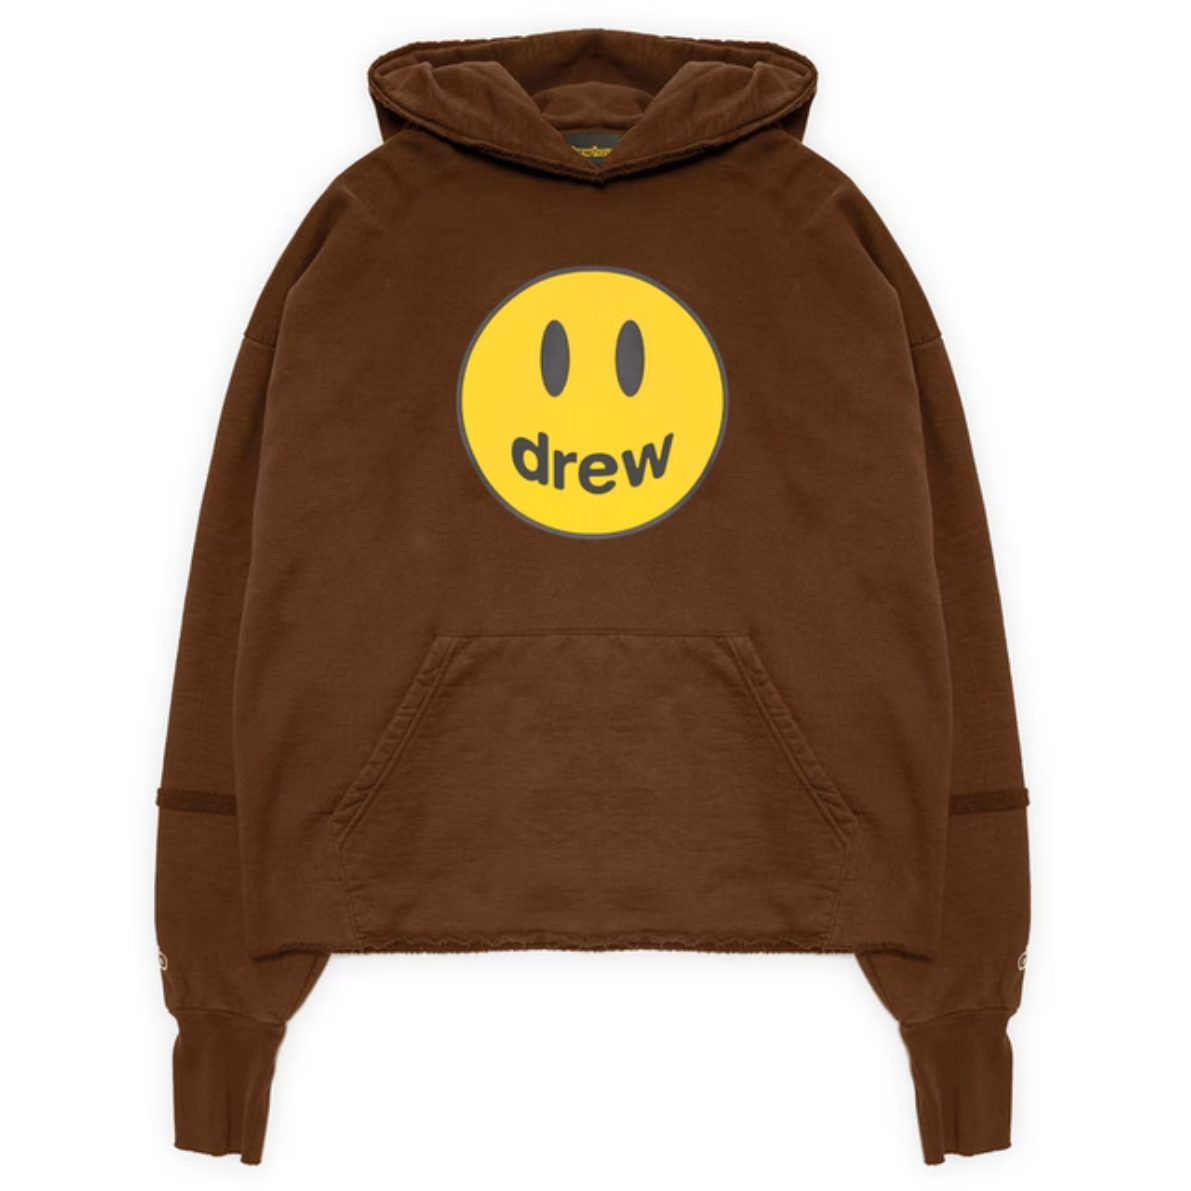 Drew house mascot deconstructed hoodie brown from Drew House